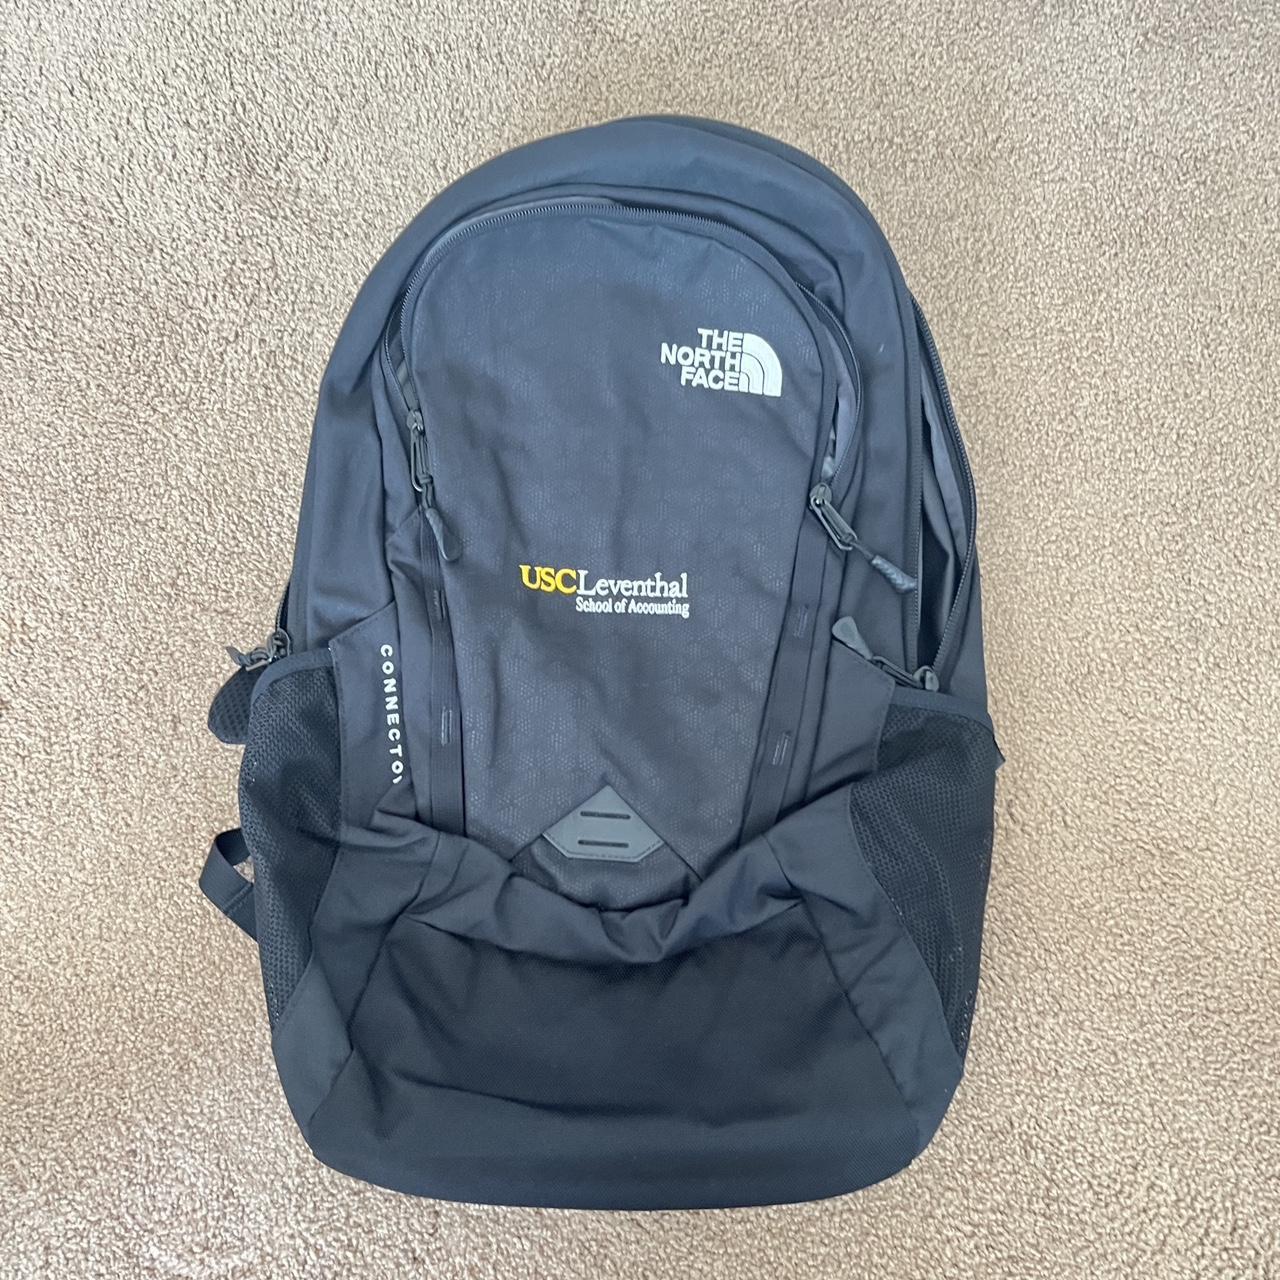 USC the north face backpack - Depop